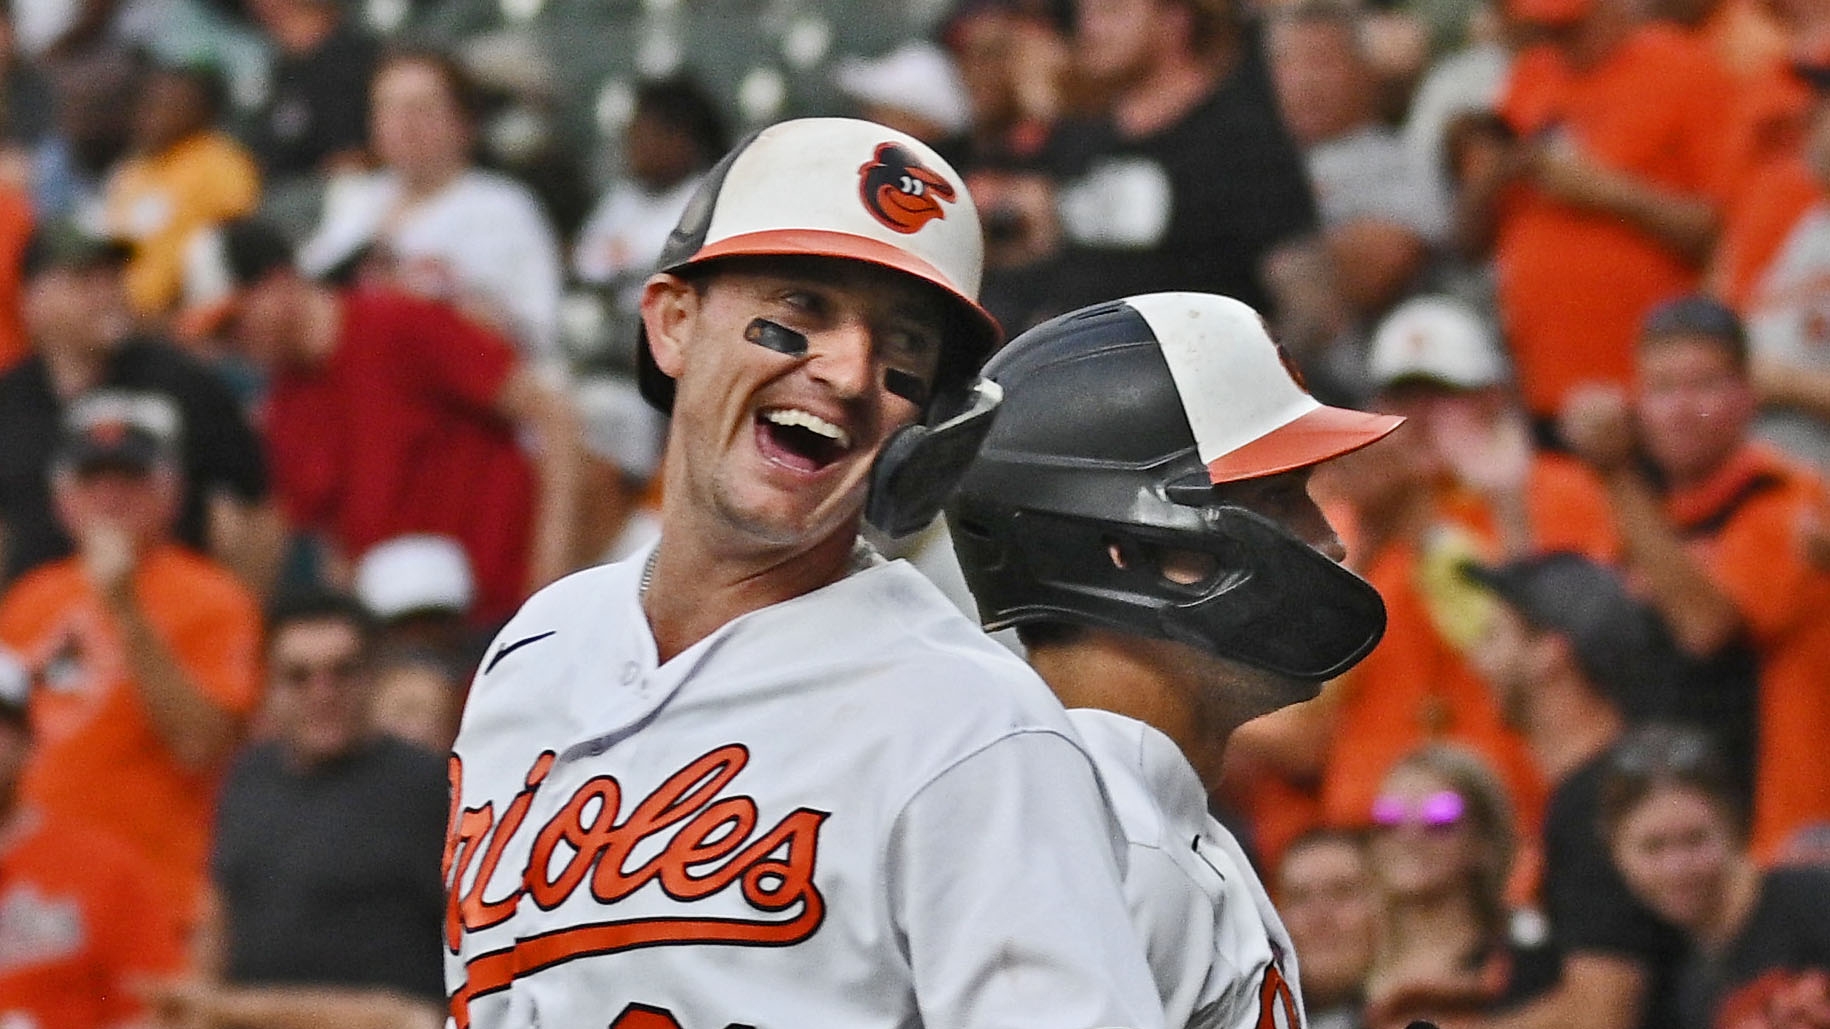 The Baltimore Orioles player who is struggling to focus on MLB